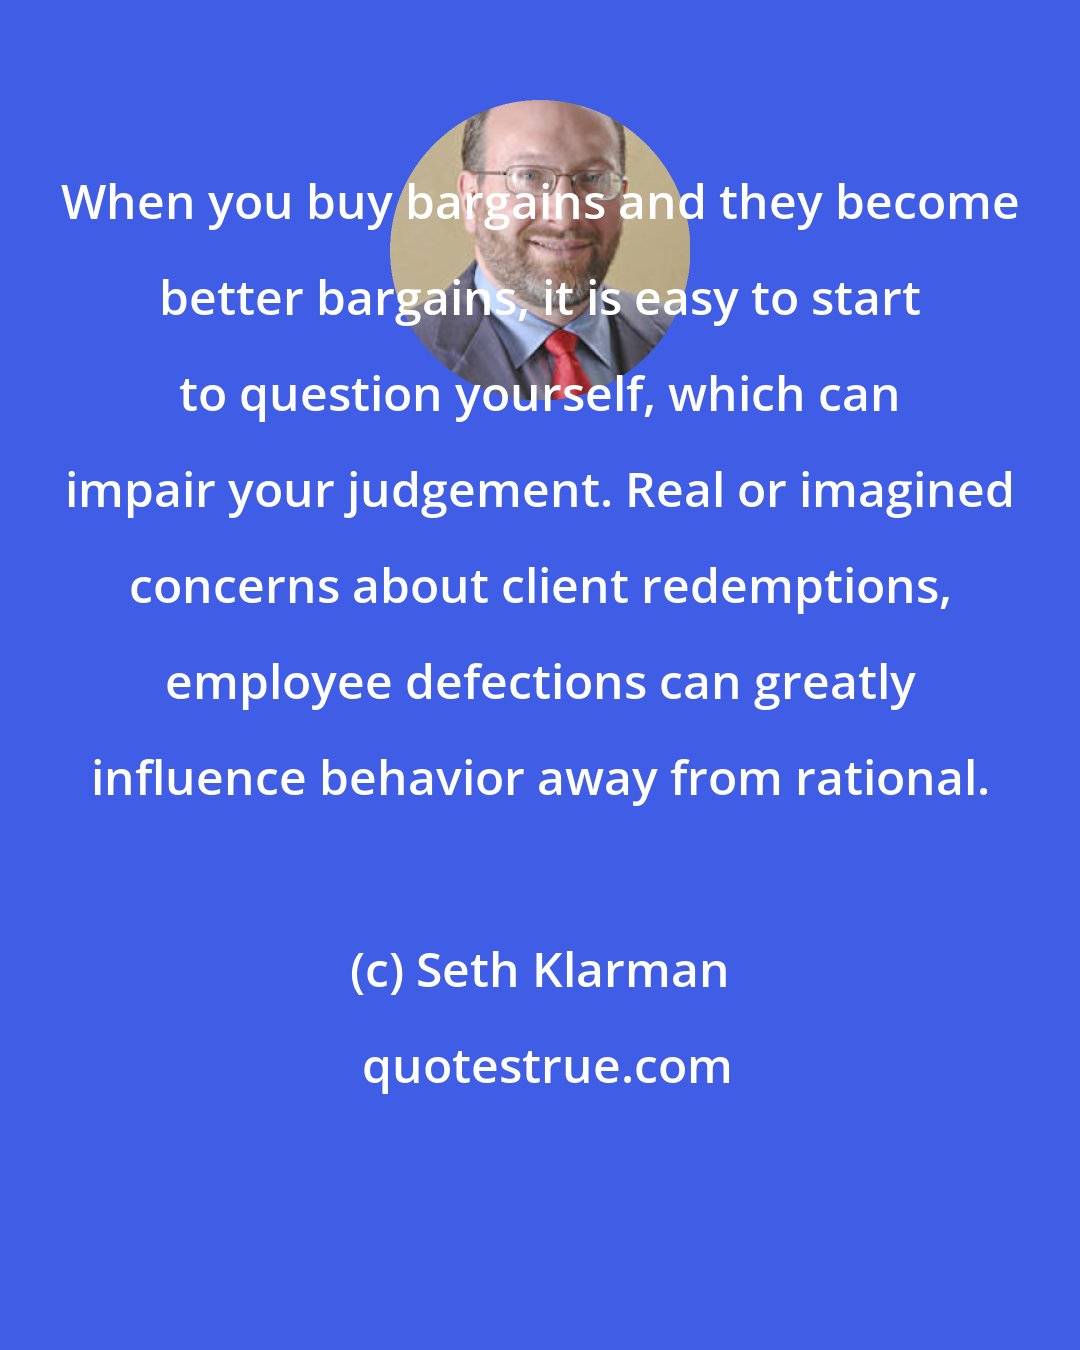 Seth Klarman: When you buy bargains and they become better bargains, it is easy to start to question yourself, which can impair your judgement. Real or imagined concerns about client redemptions, employee defections can greatly influence behavior away from rational.